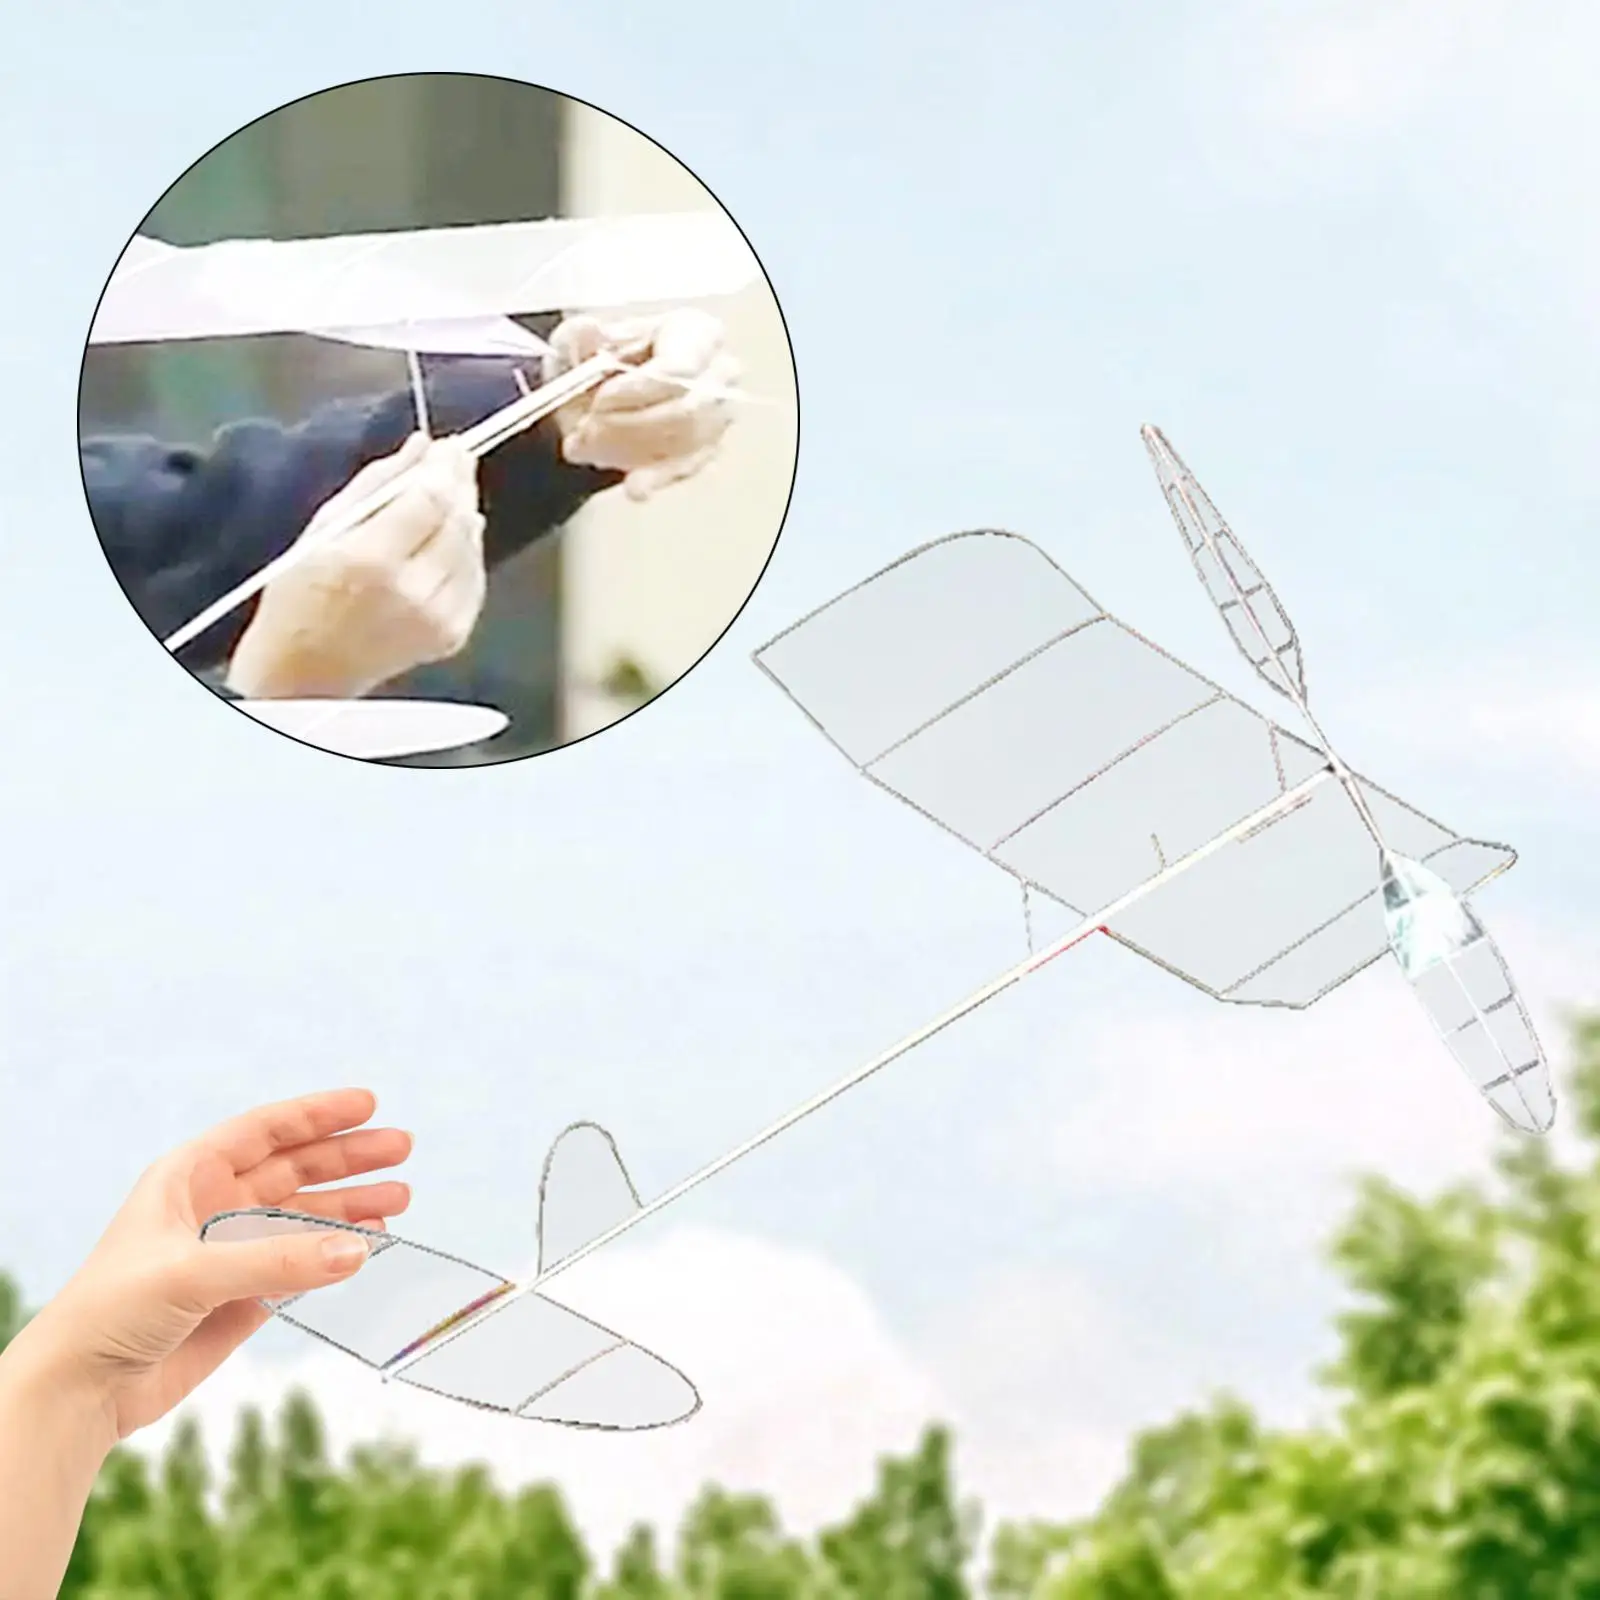 Elastic Powered Airplane Model Flying Toys Logical Thinking Rubber Band Powered Airplane for Park playground Sport Outdoor